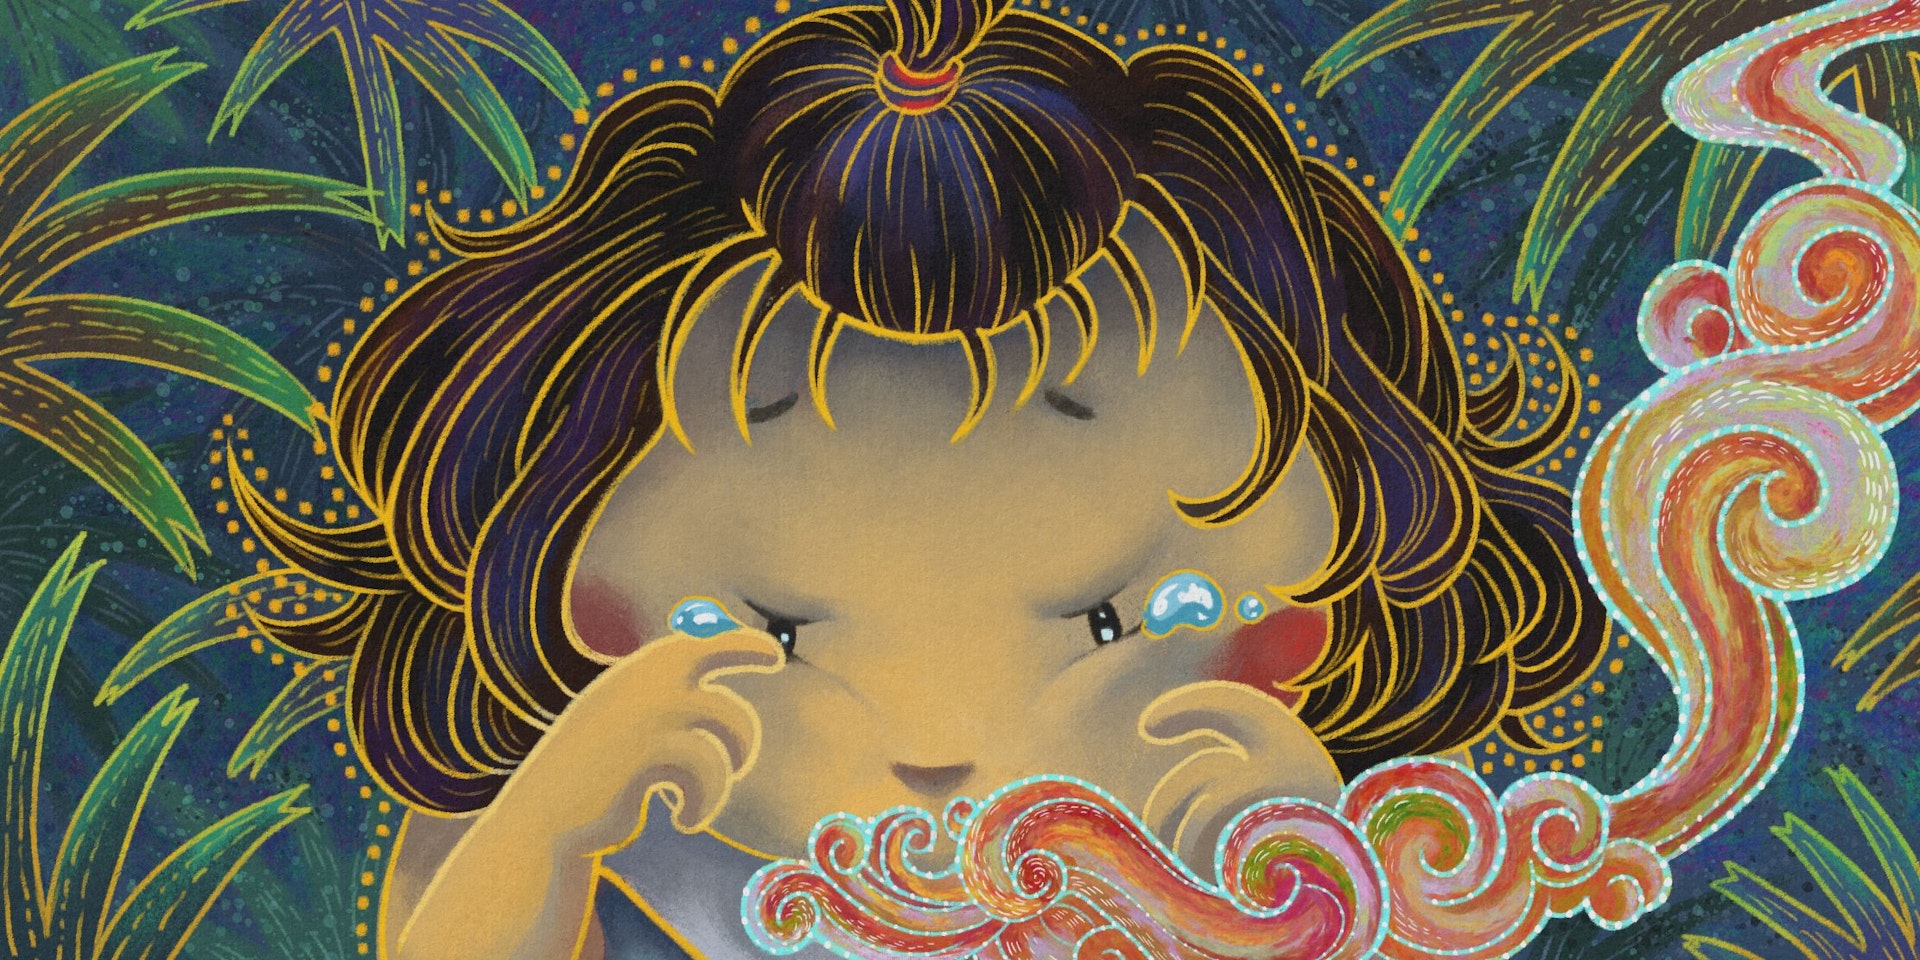 Digital painting with chalk texture and batik-inspired style and motifs, of a close-up scene of a young girl with short curly hair, some tied up in a tuft on her head, rubbing tears off her face as a colorful scent cloud drifts pass her nose.